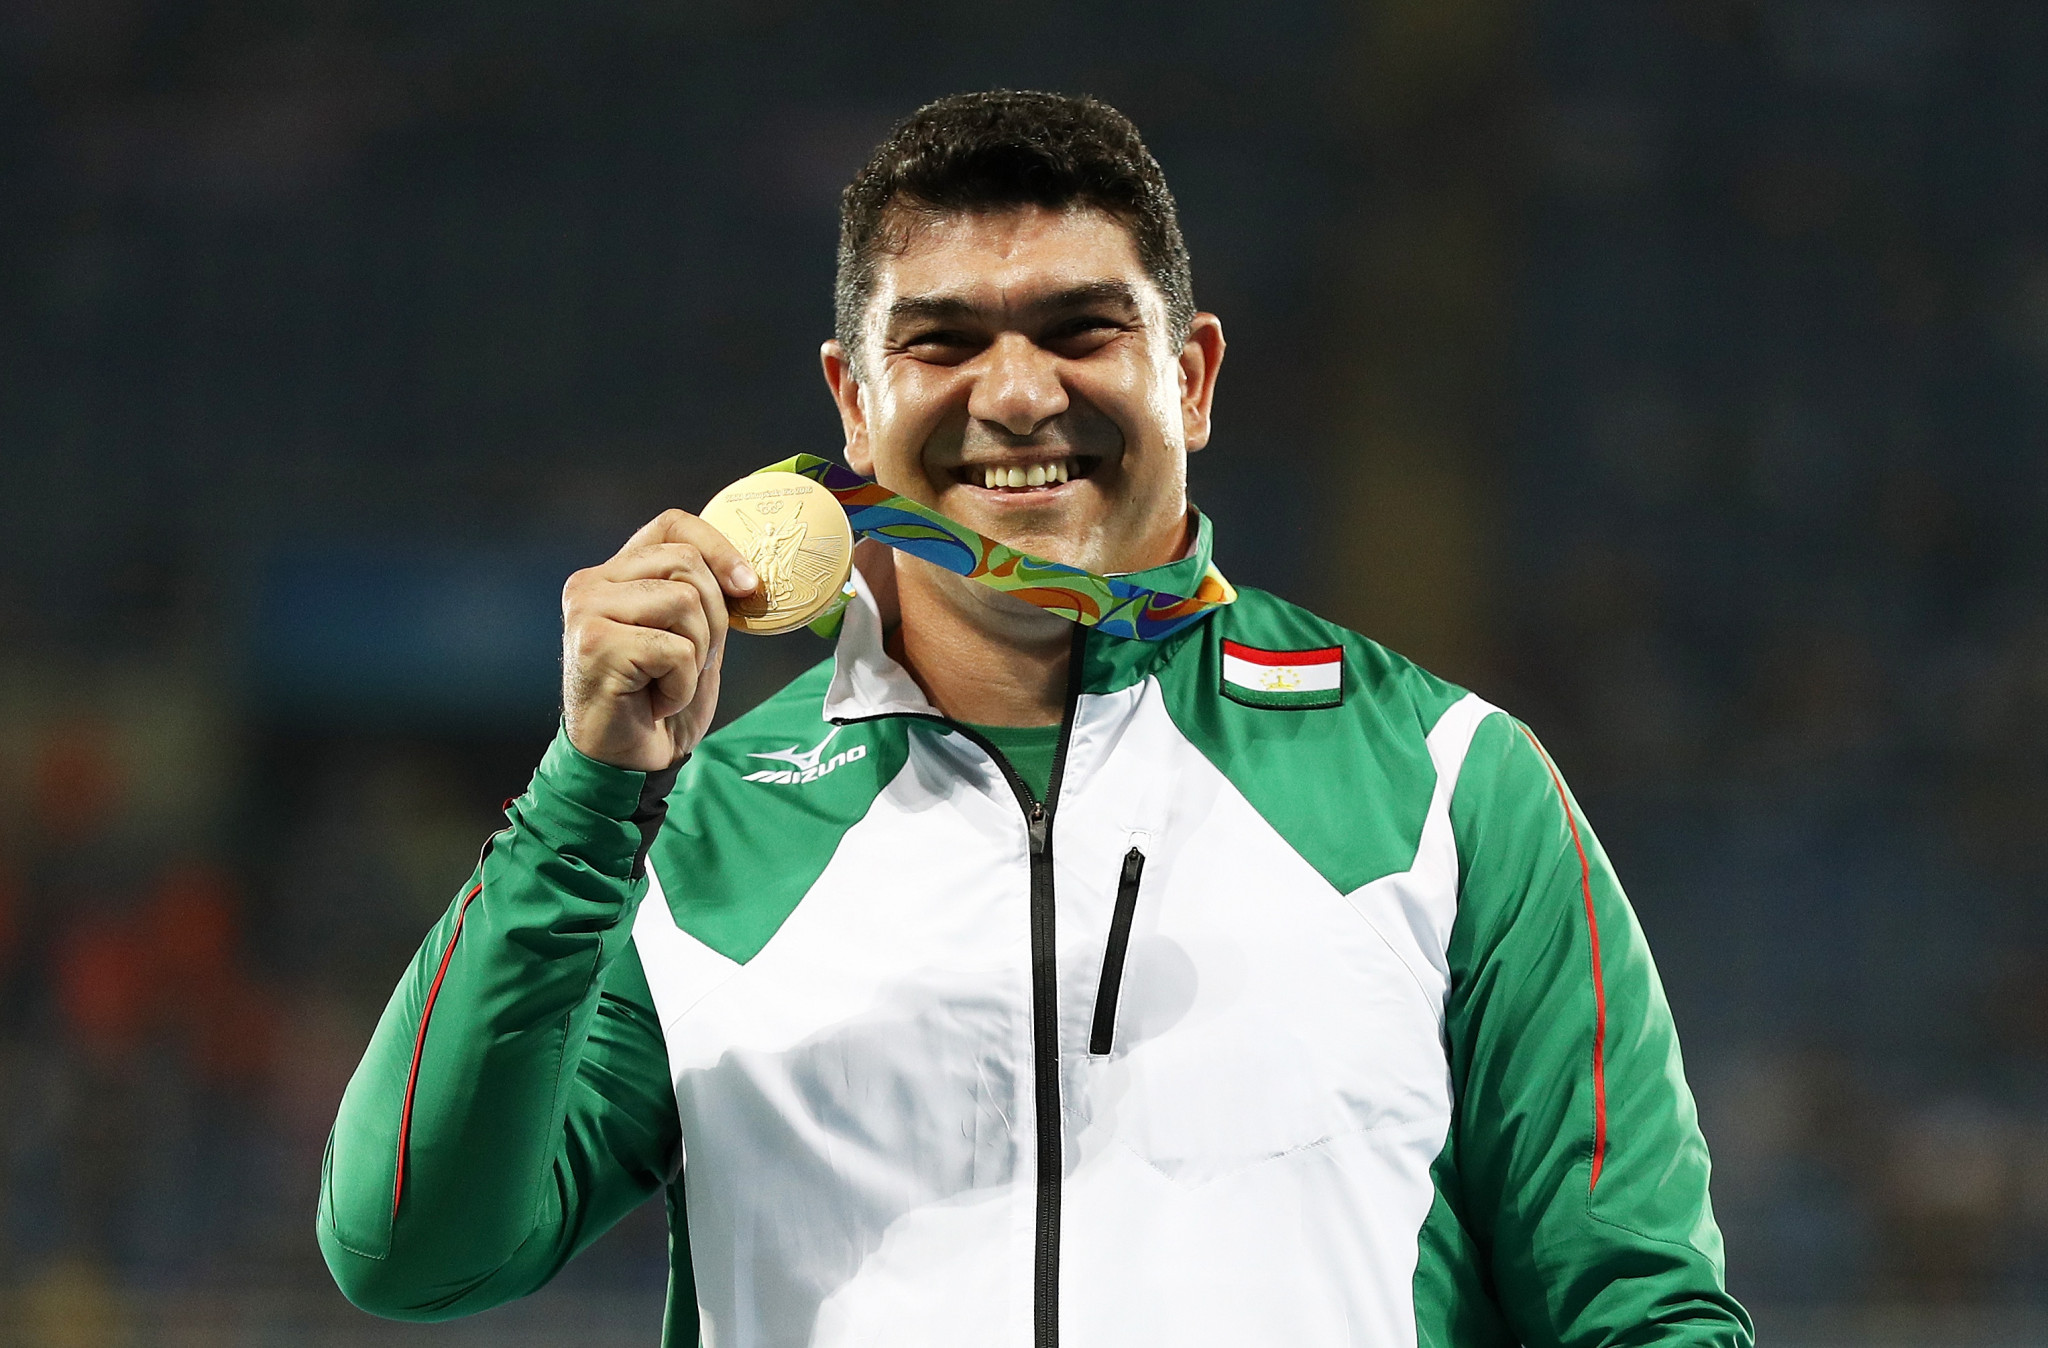 Dilshod Nazarov won Tajikistan's first Olympic gold medal at Rio 2016 ©Getty Images